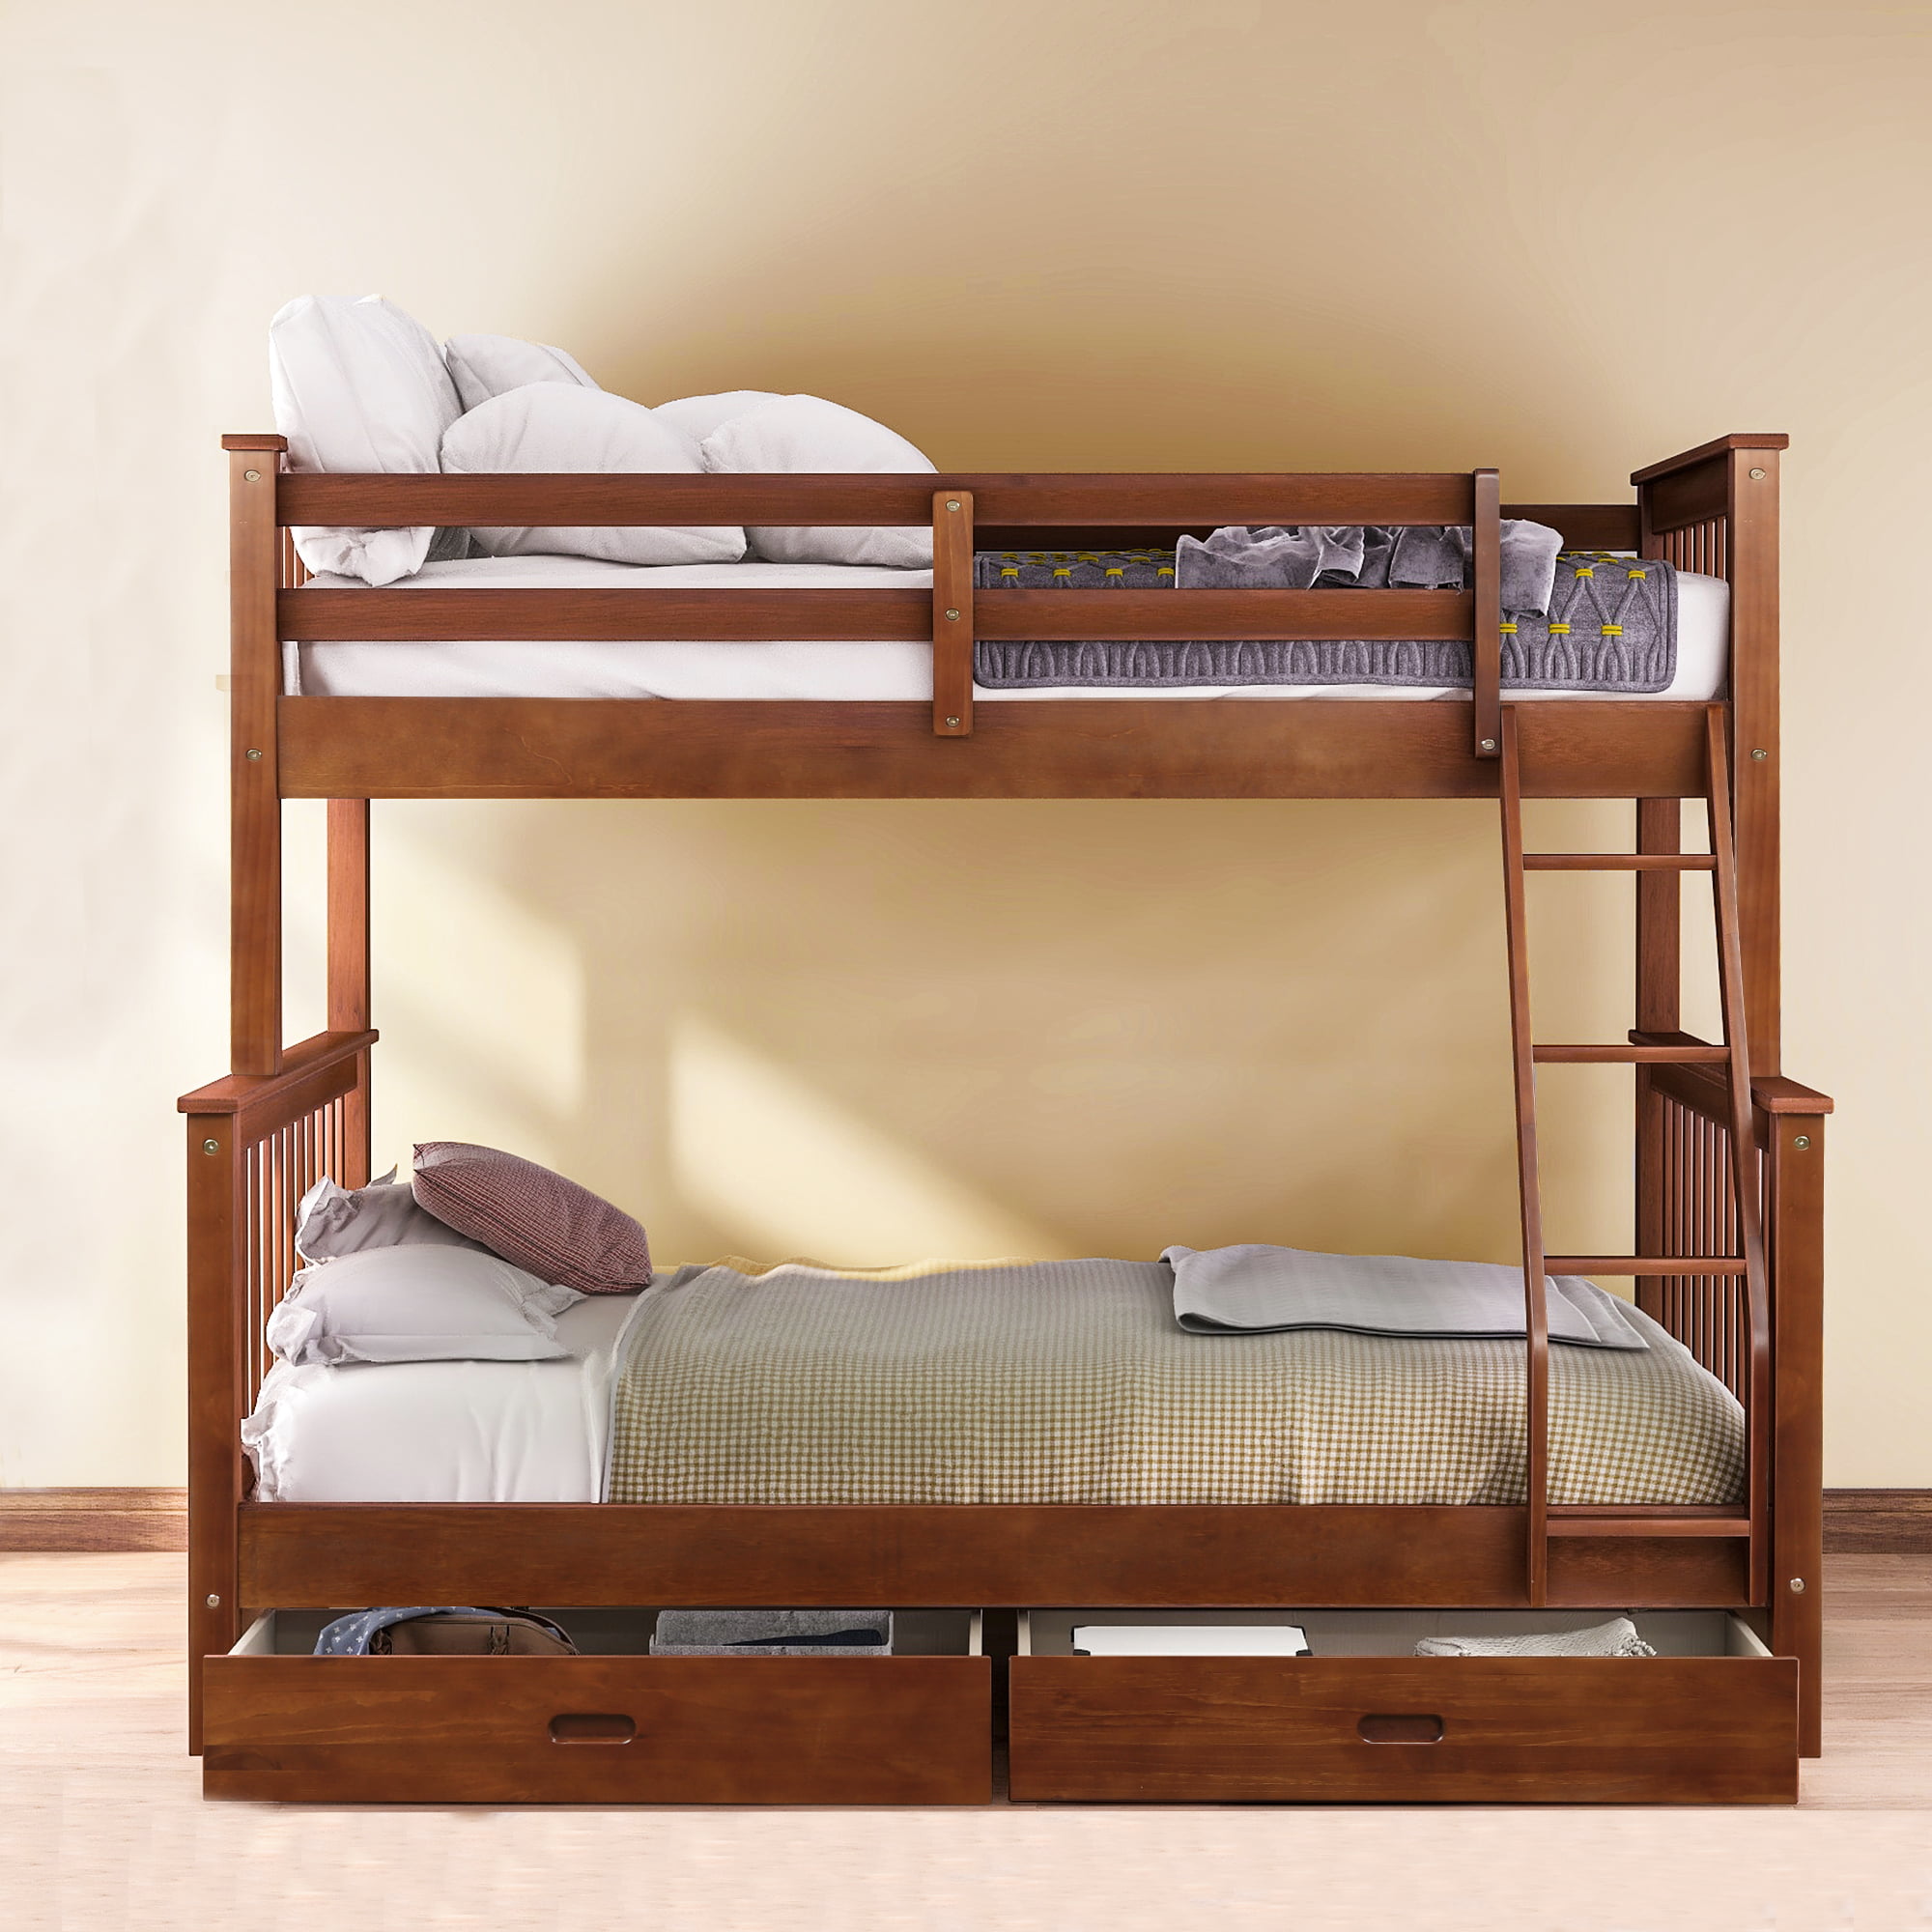 Wood Twin Over Full Bunk Beds Kids Bunk Beds With Ladder Safety Rail